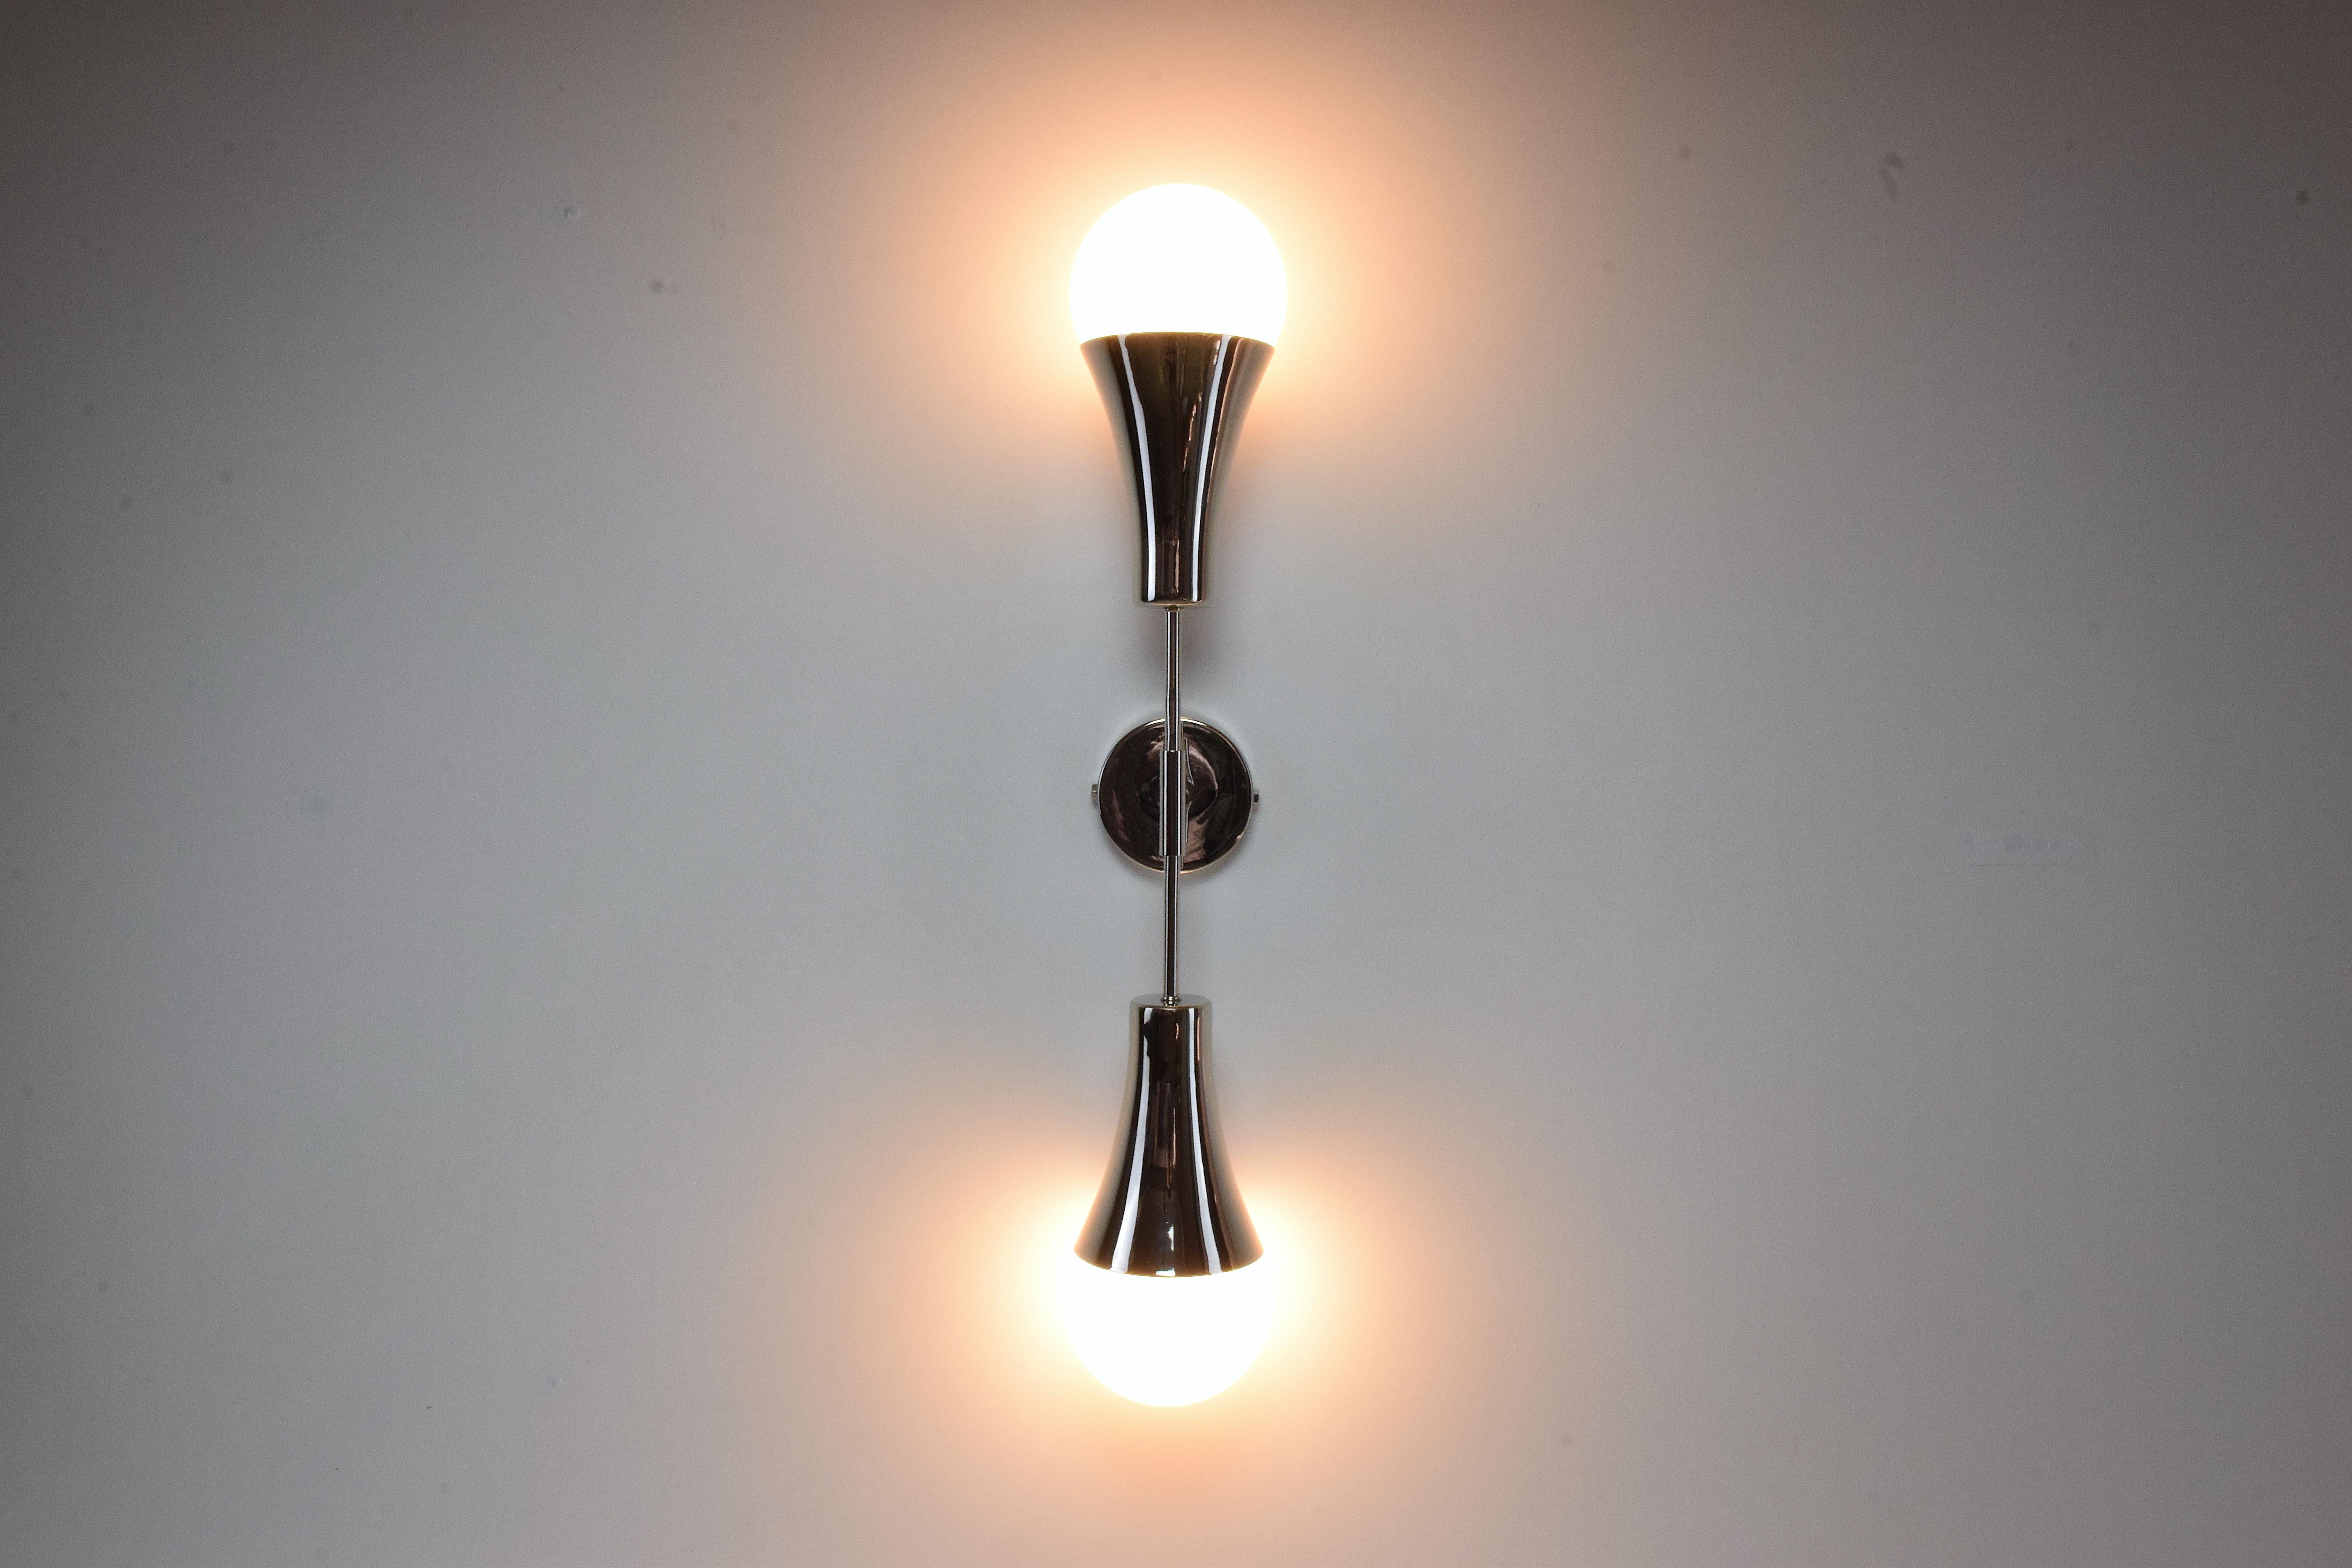 Contemporary modern handcrafted wall lamp fixture or sconce, composed of a double silver nickel plated polished solid brass and opaque glass boule light shades. A leather-sheathed detail on both ends of the stems hand sewn by artisan saddlers is